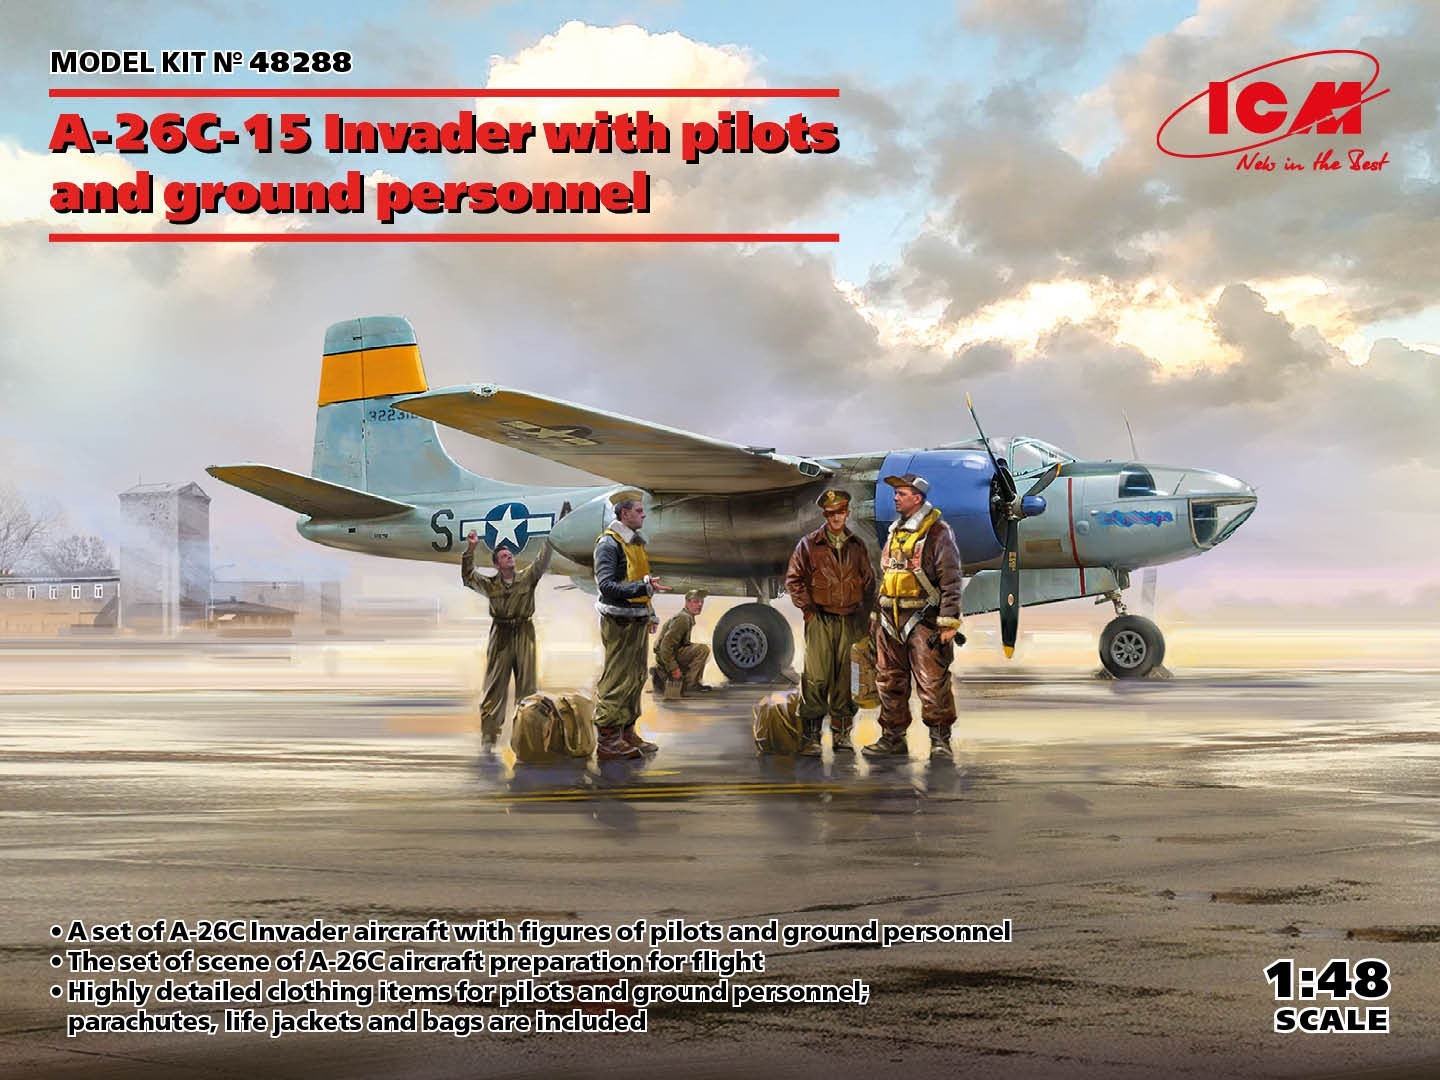 48288 - A-26C-15, Invader with pilots and ground personnel - 1:48